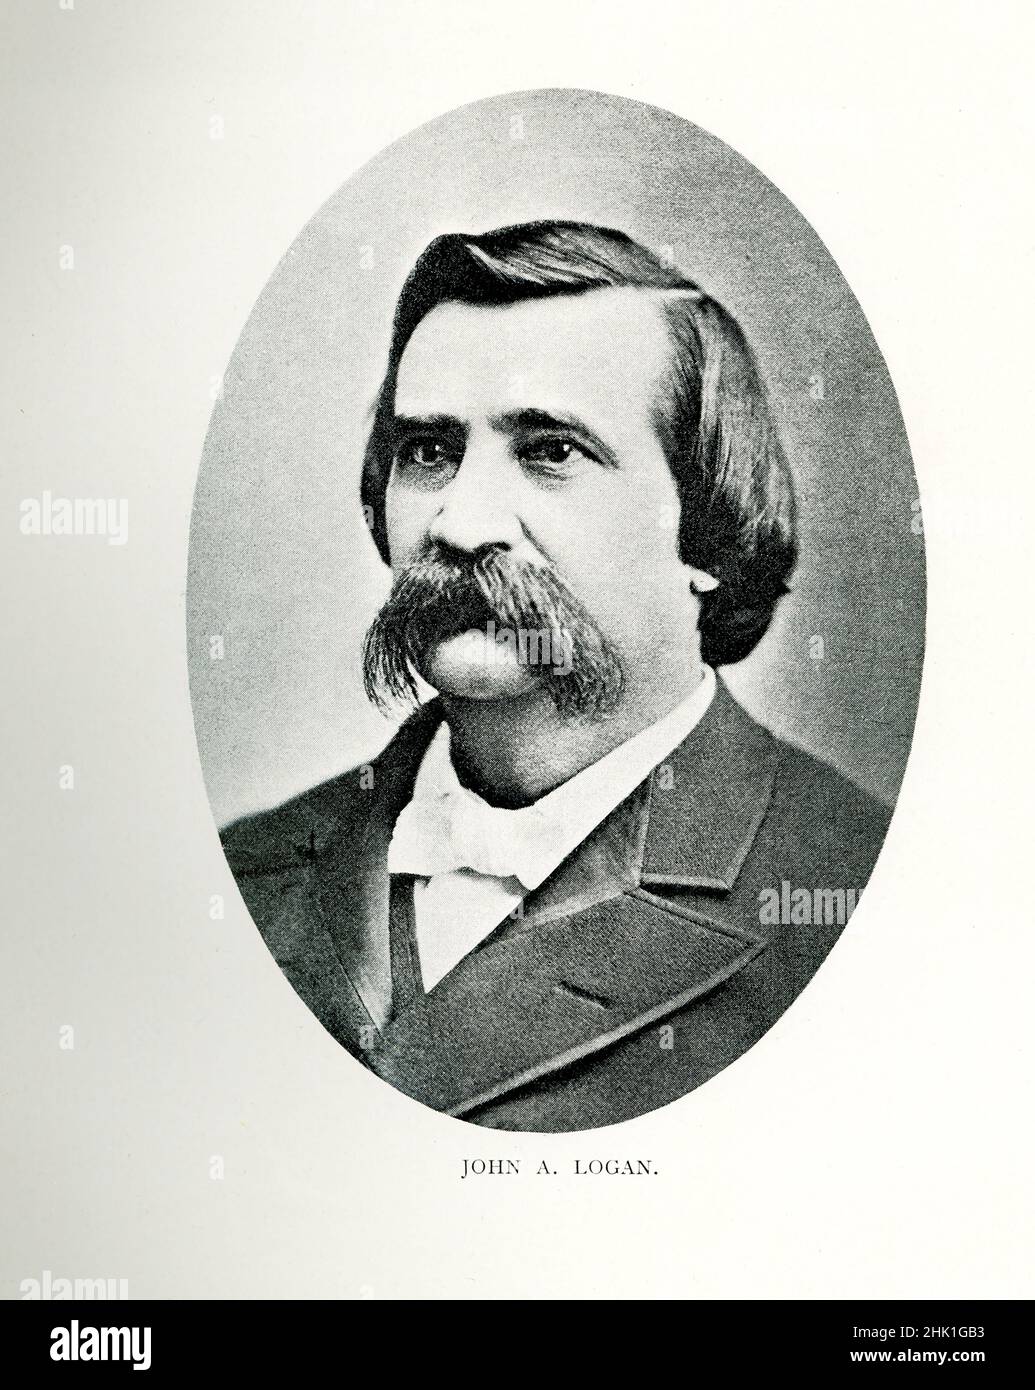 John Alexander Logan (1826 –1886) was an American soldier and politician. He served in the Mexican–American War and was a general in the Union Army in the American Civil War. He served the state of Illinois as a state Representative, a Congressman, and a U.S. Senator and was an unsuccessful candidate for Vice President of the United States with James G. Blaine in the election of 1884. Stock Photo